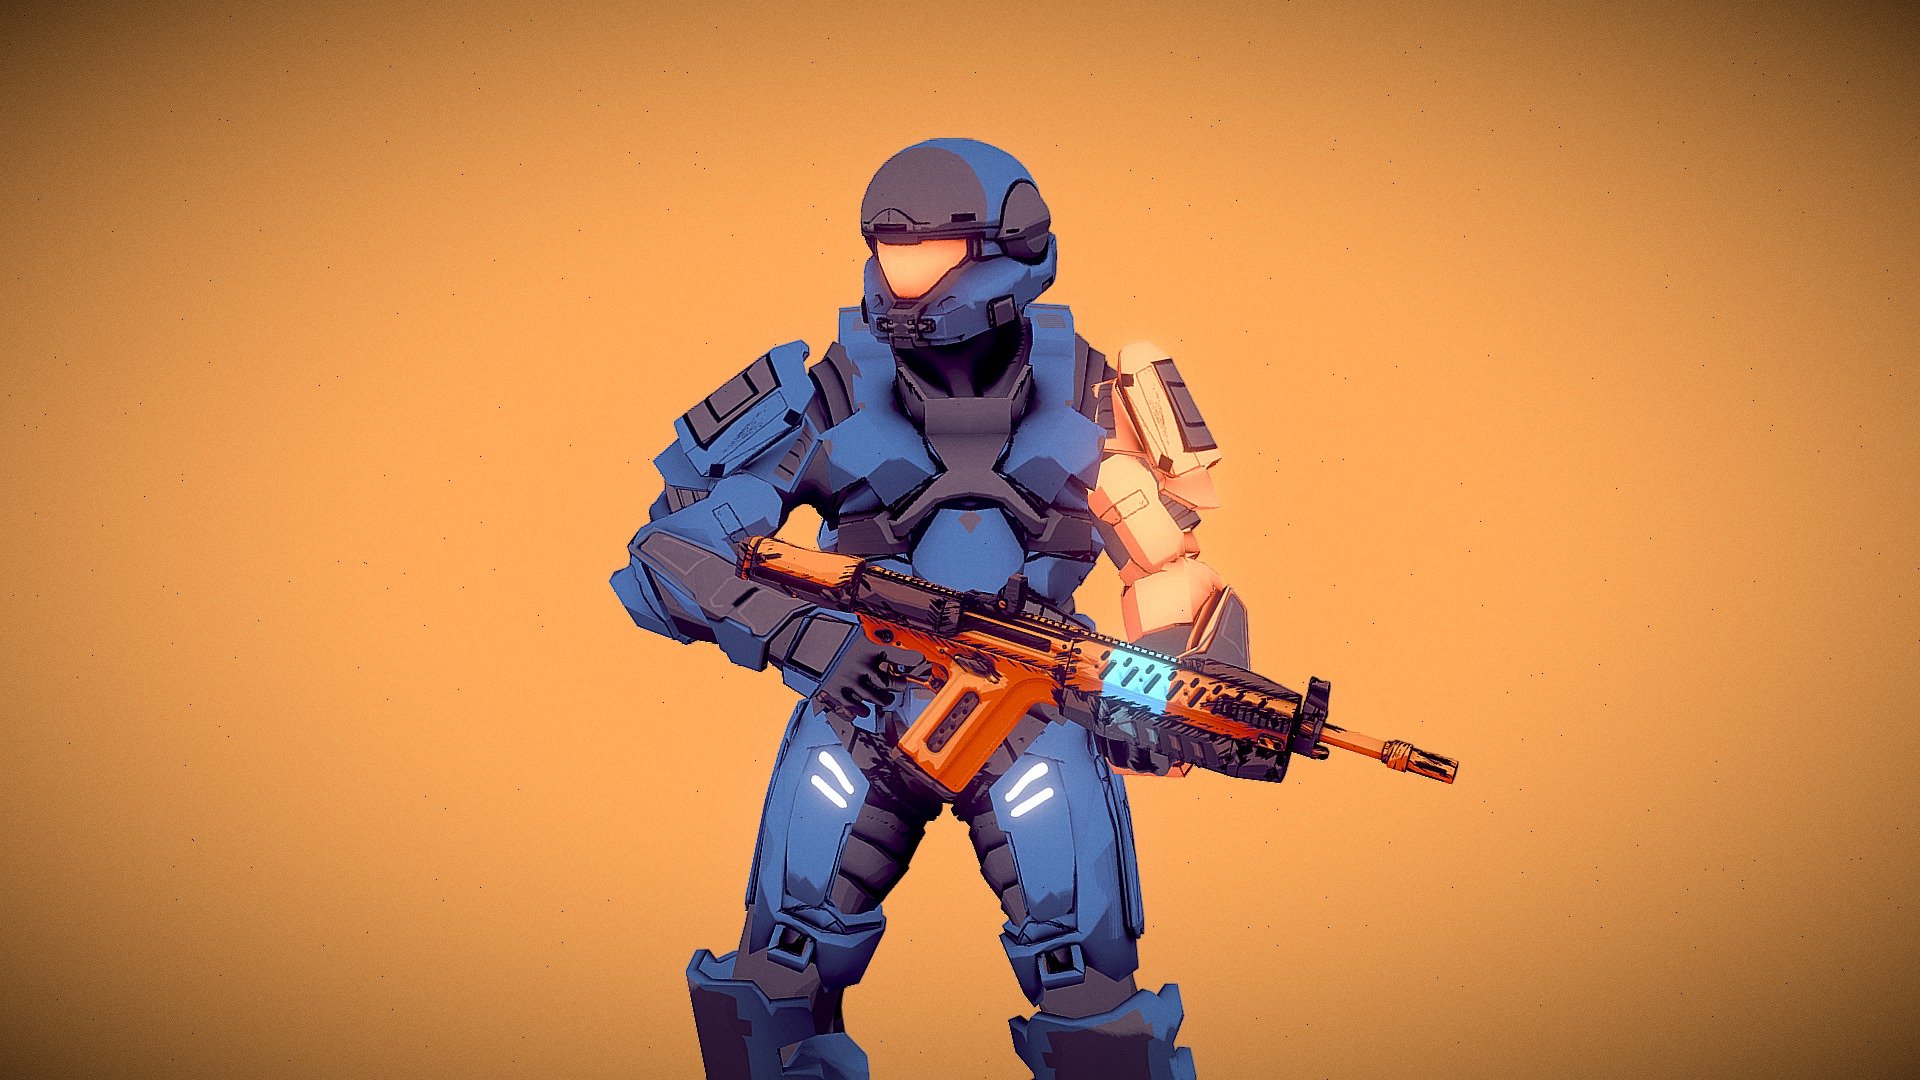 A Spartan EOD from Halo with textures for cel shading Ready for games - Halo Spartan EOD Cel Shading - 3D model by DiegoVega 3d model